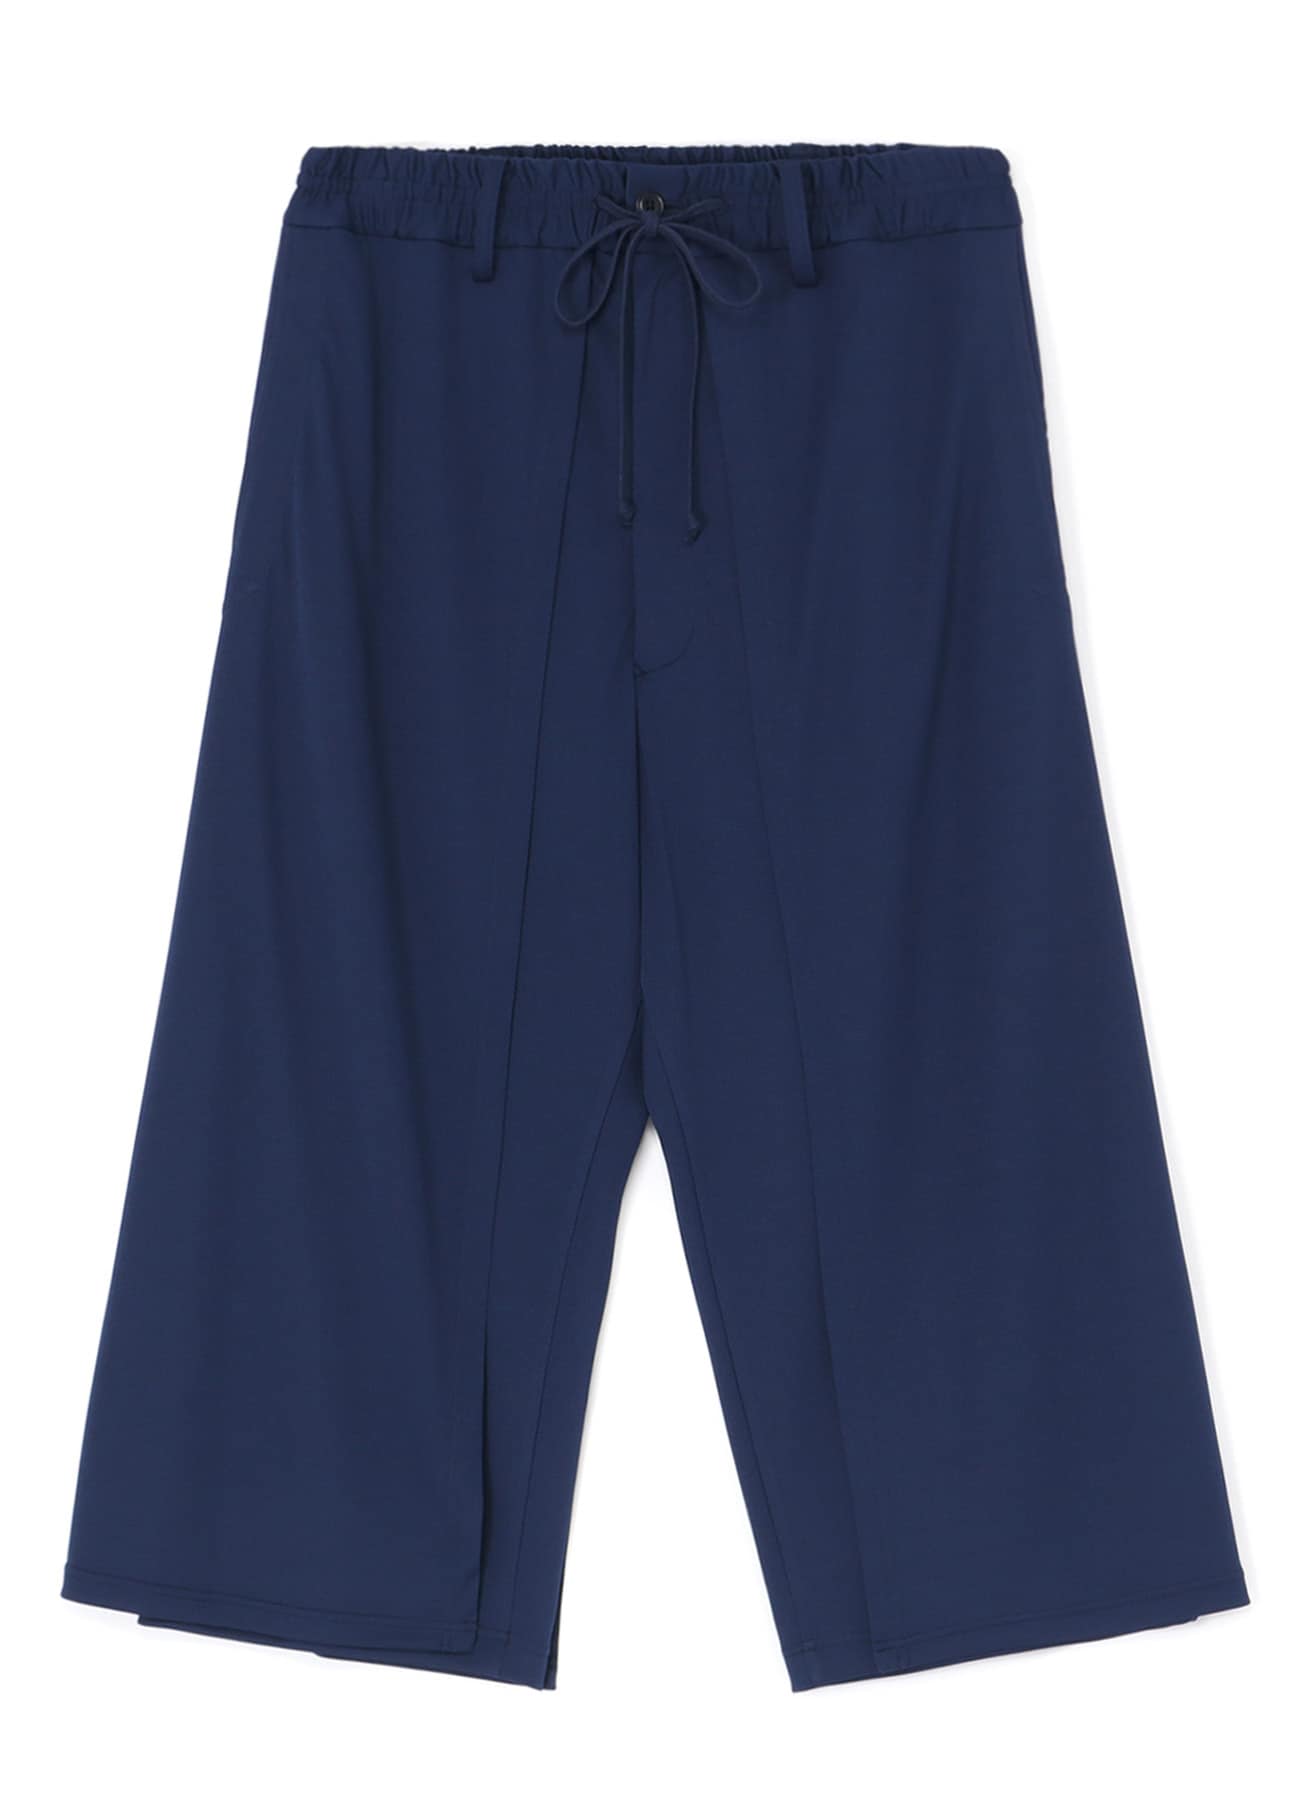 HIGH-GAUGE POLYESTER SMOOTH JERSEY LAYERED PANTS(M Navy): S'YTE 